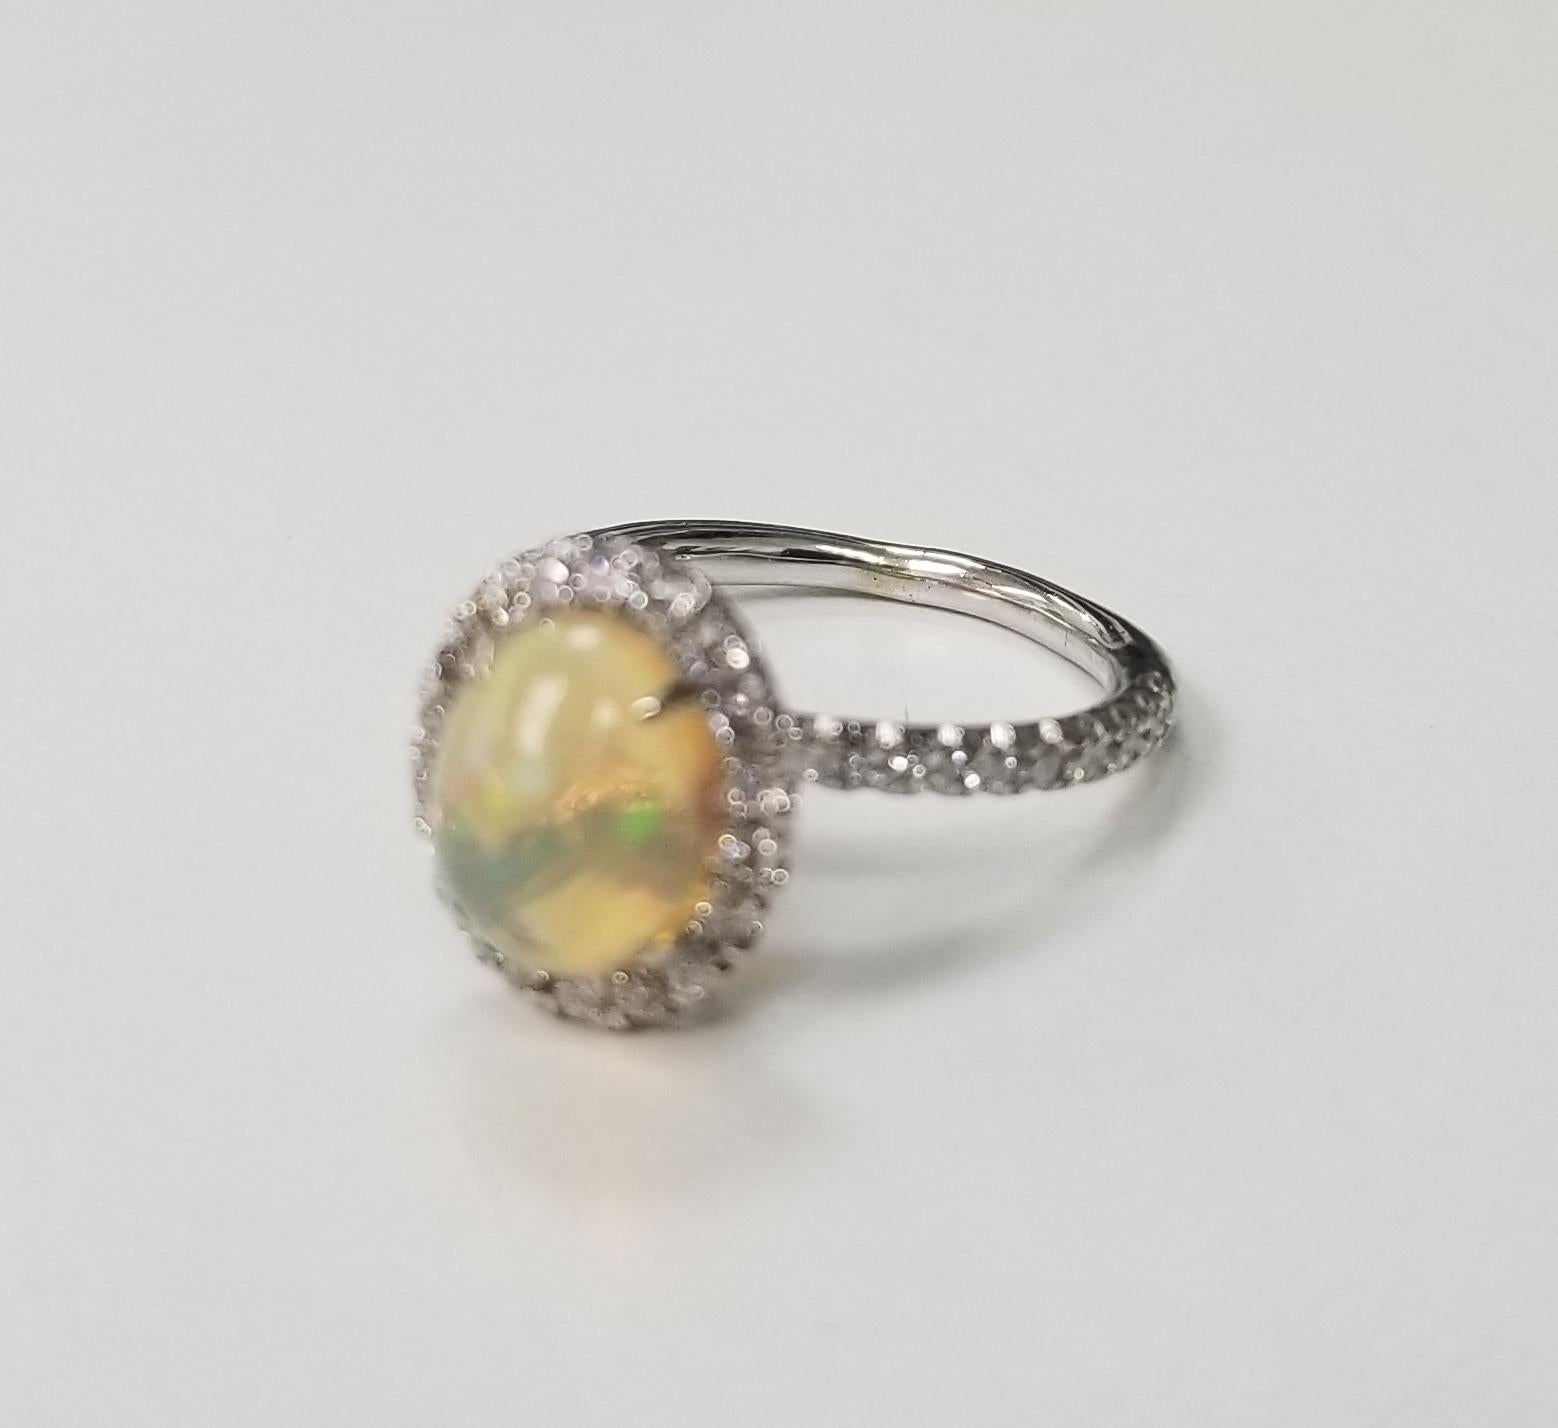 14 karat African Opal and diamond ring, containing 38 round full cut diamonds of very fine quality weighing .45pts. ring size is 4.5 and can be sized to fit.